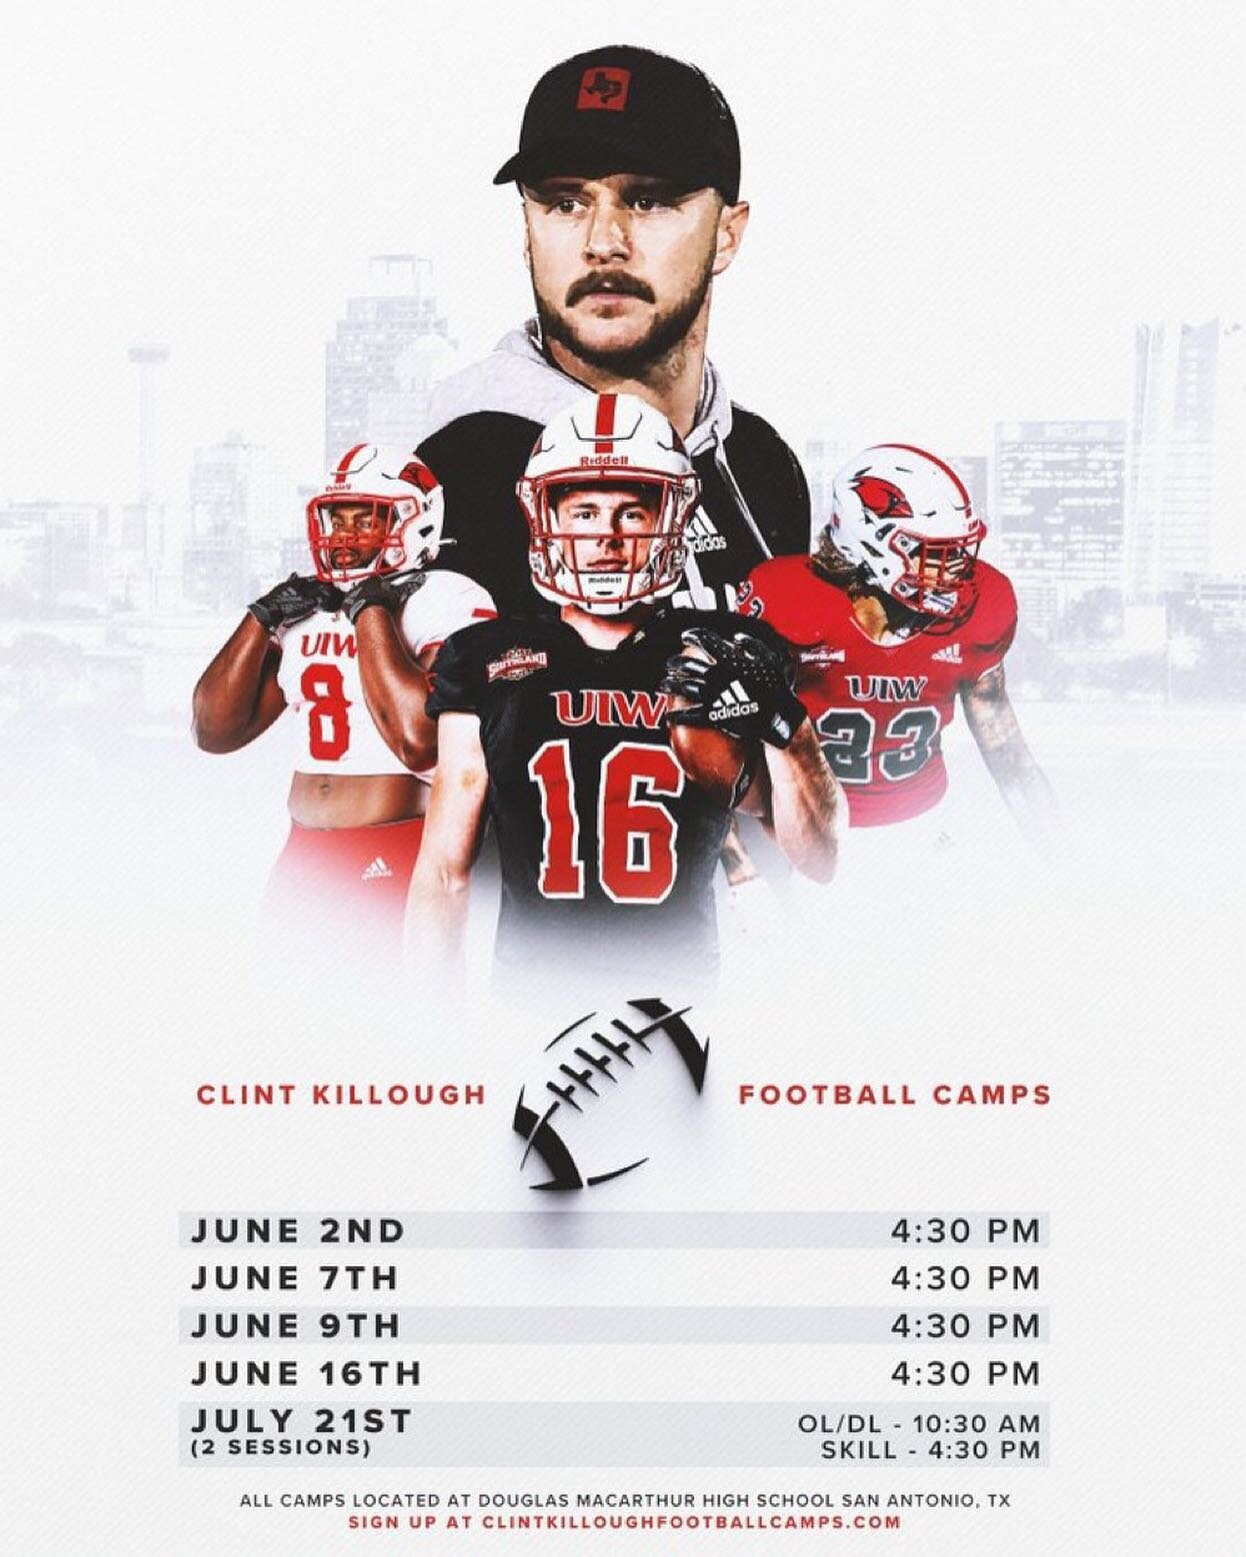 Recruits, head on over to clintkilloughfootballcamps.com if you think you have what it takes to earn a UIW football scholarship and become a CHAMPION! 

It&rsquo;s a great day to be alive and to be a Cardinal! 👌

#uiw #uiwfootball #uiwathletics #uiw